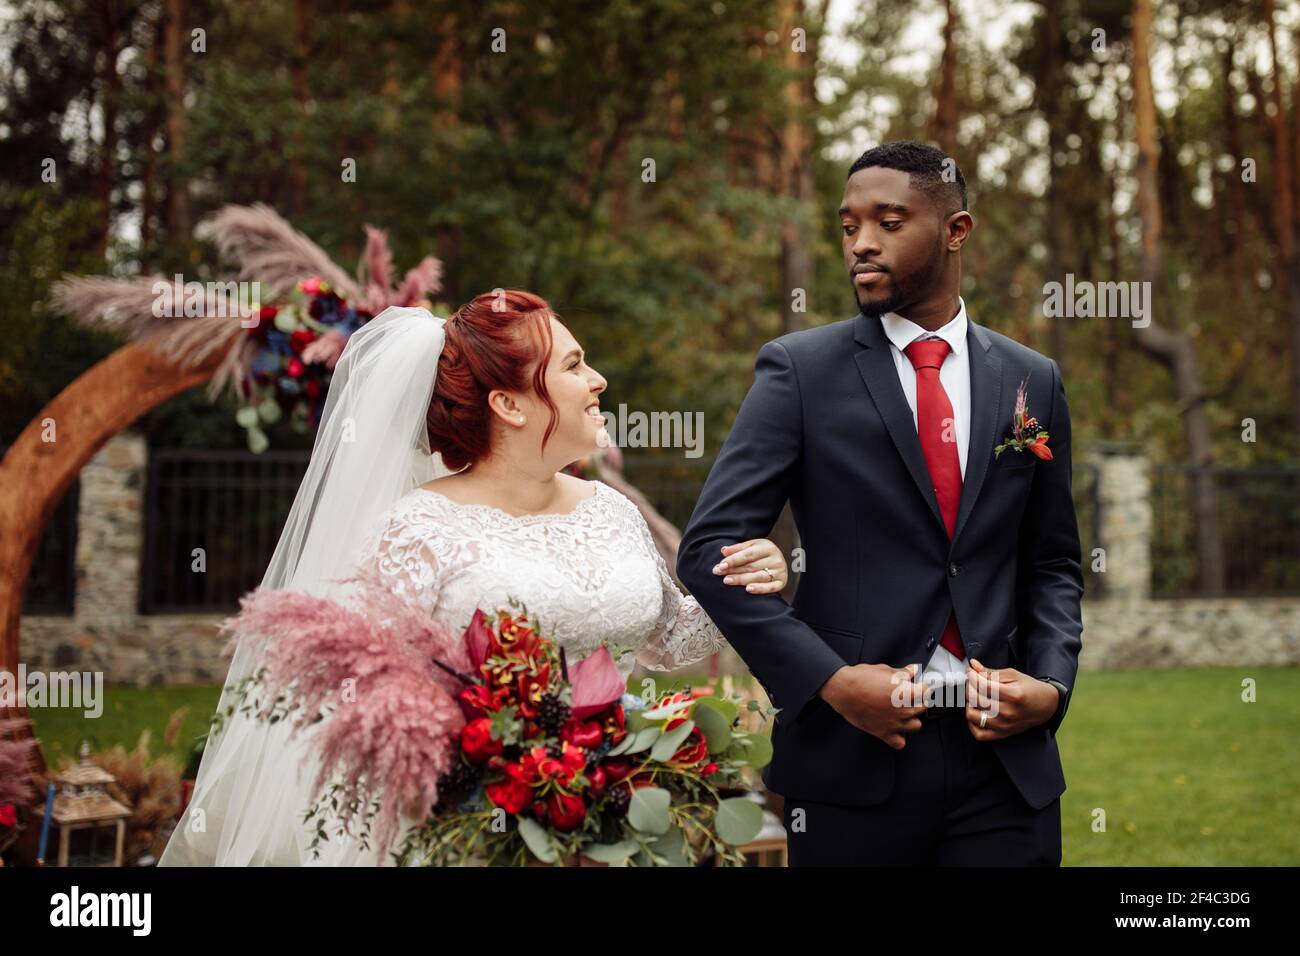 https://c8.alamy.com/comp/2F4C3DG/charming-african-american-groom-with-gorgeous-white-wife-stand-near-decorated-arch-lovely-woman-with-handsome-man-on-wedding-ceremony-smiling-happy-2F4C3DG.jpg